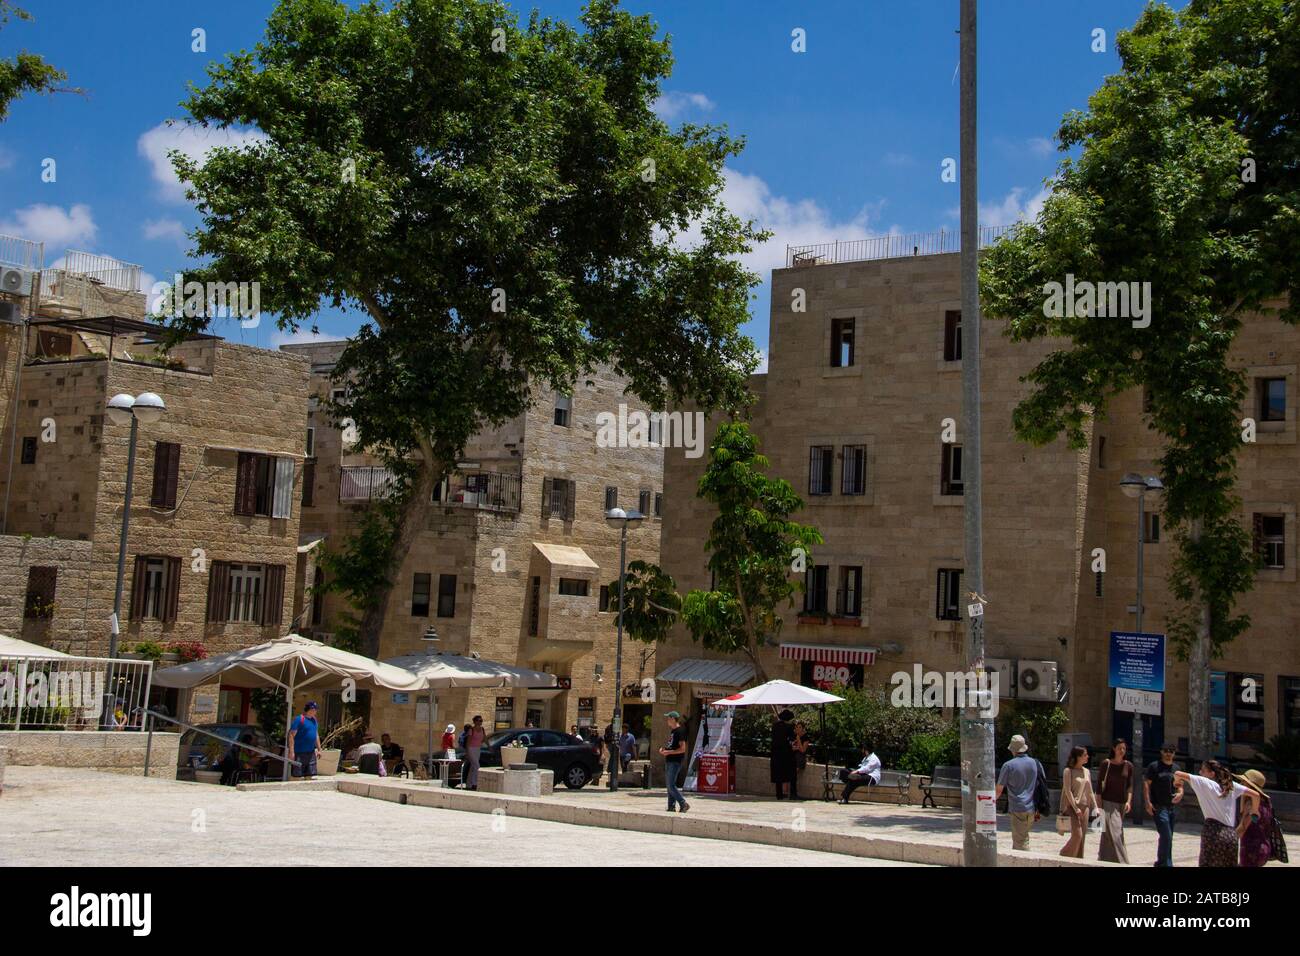 The Jewish Quarter in the Old City of Jerusalem Stock Photo